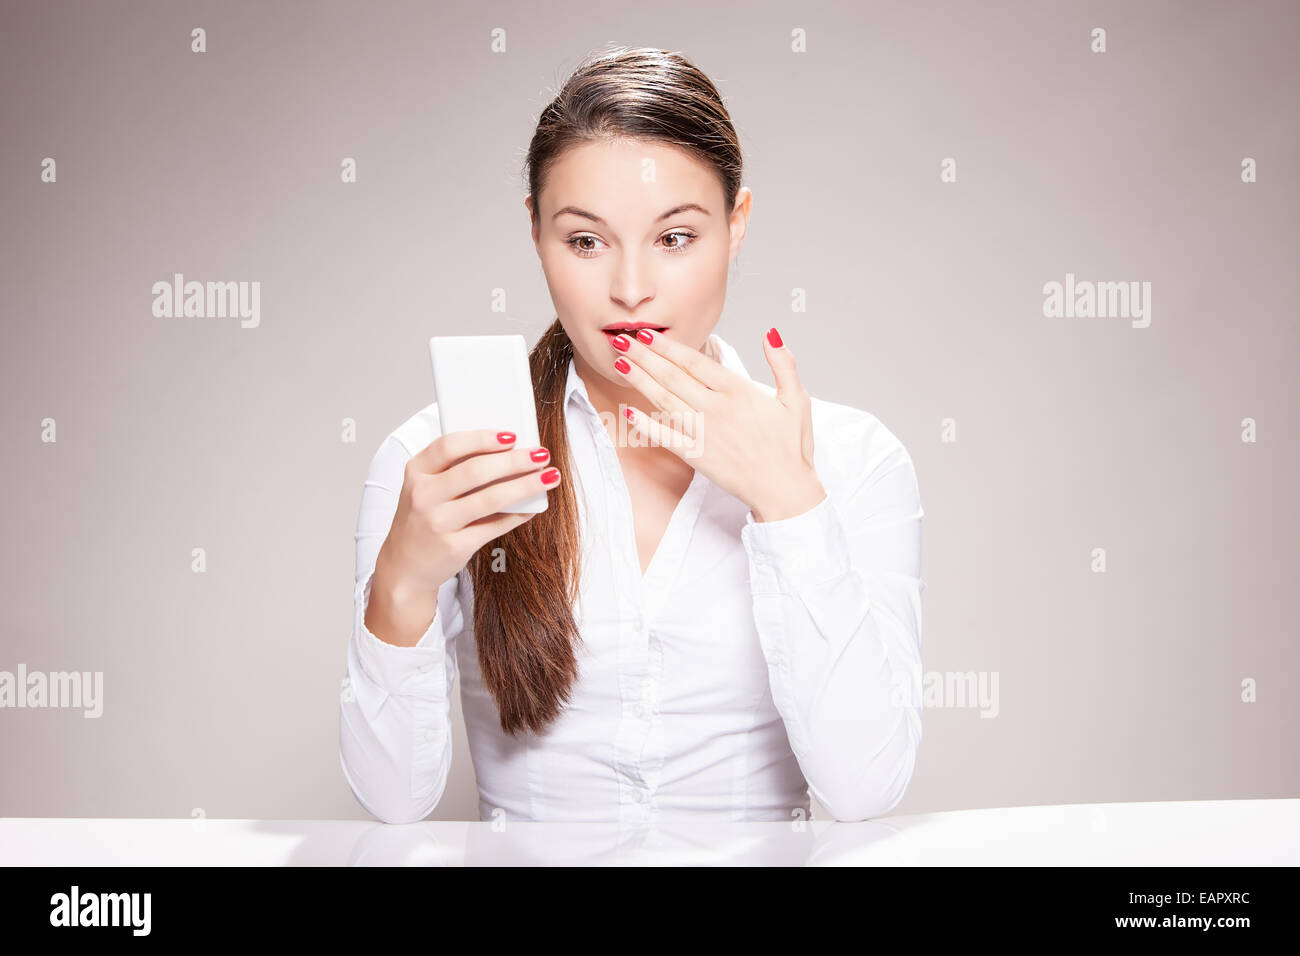 Attractive young woman sitting and looking at smartphone. Stock Photo